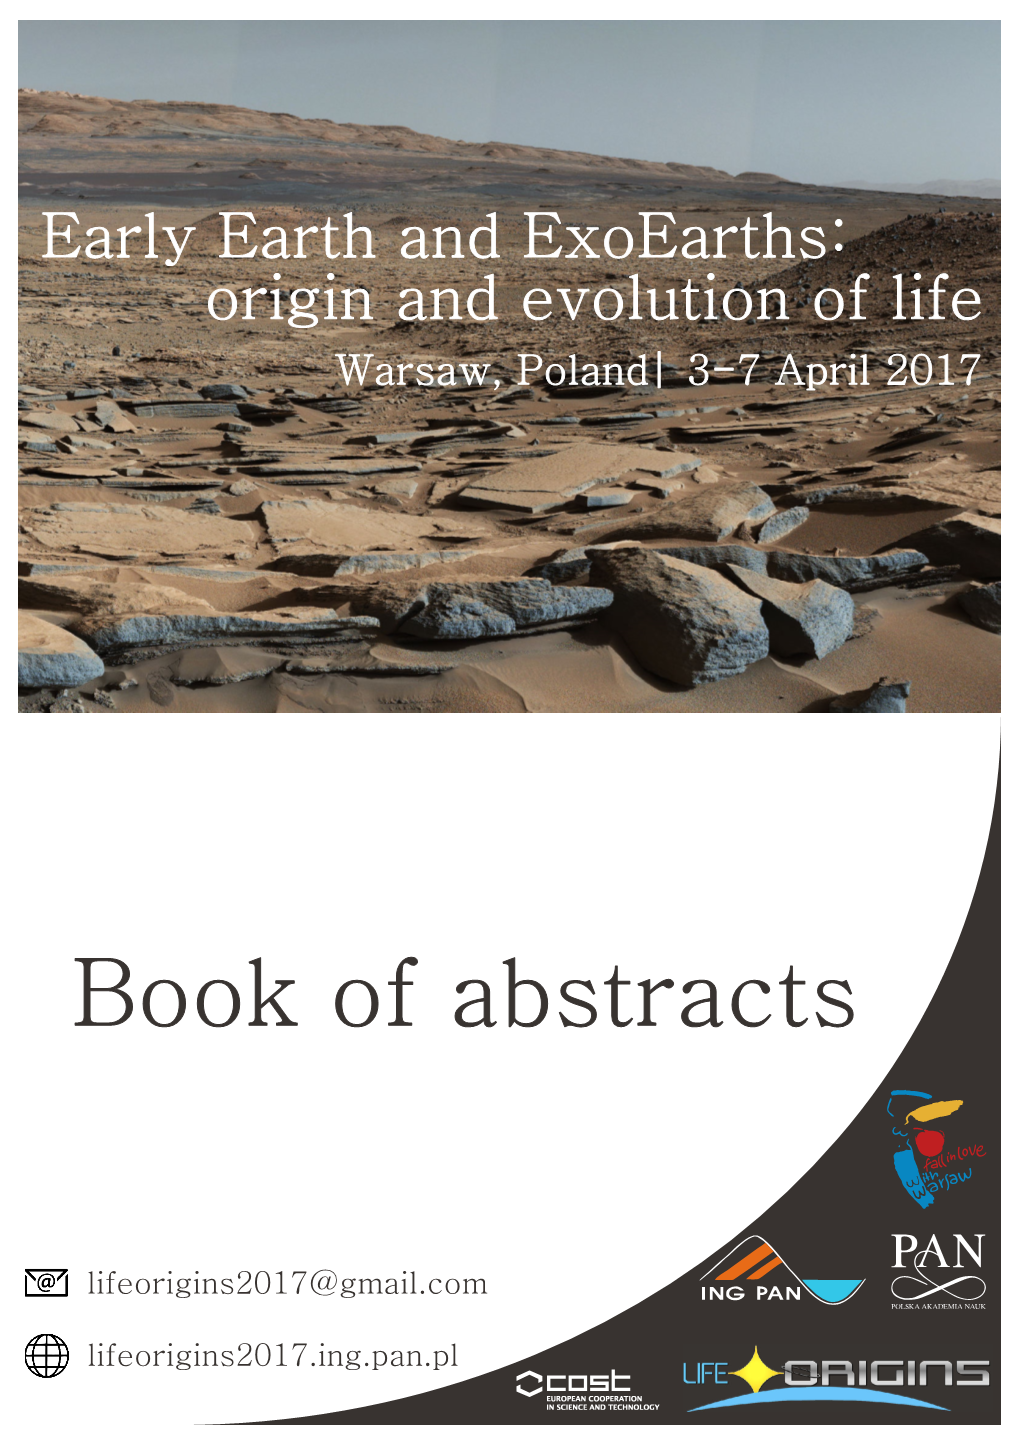 Lifeorigins2017 Book of Abstracts